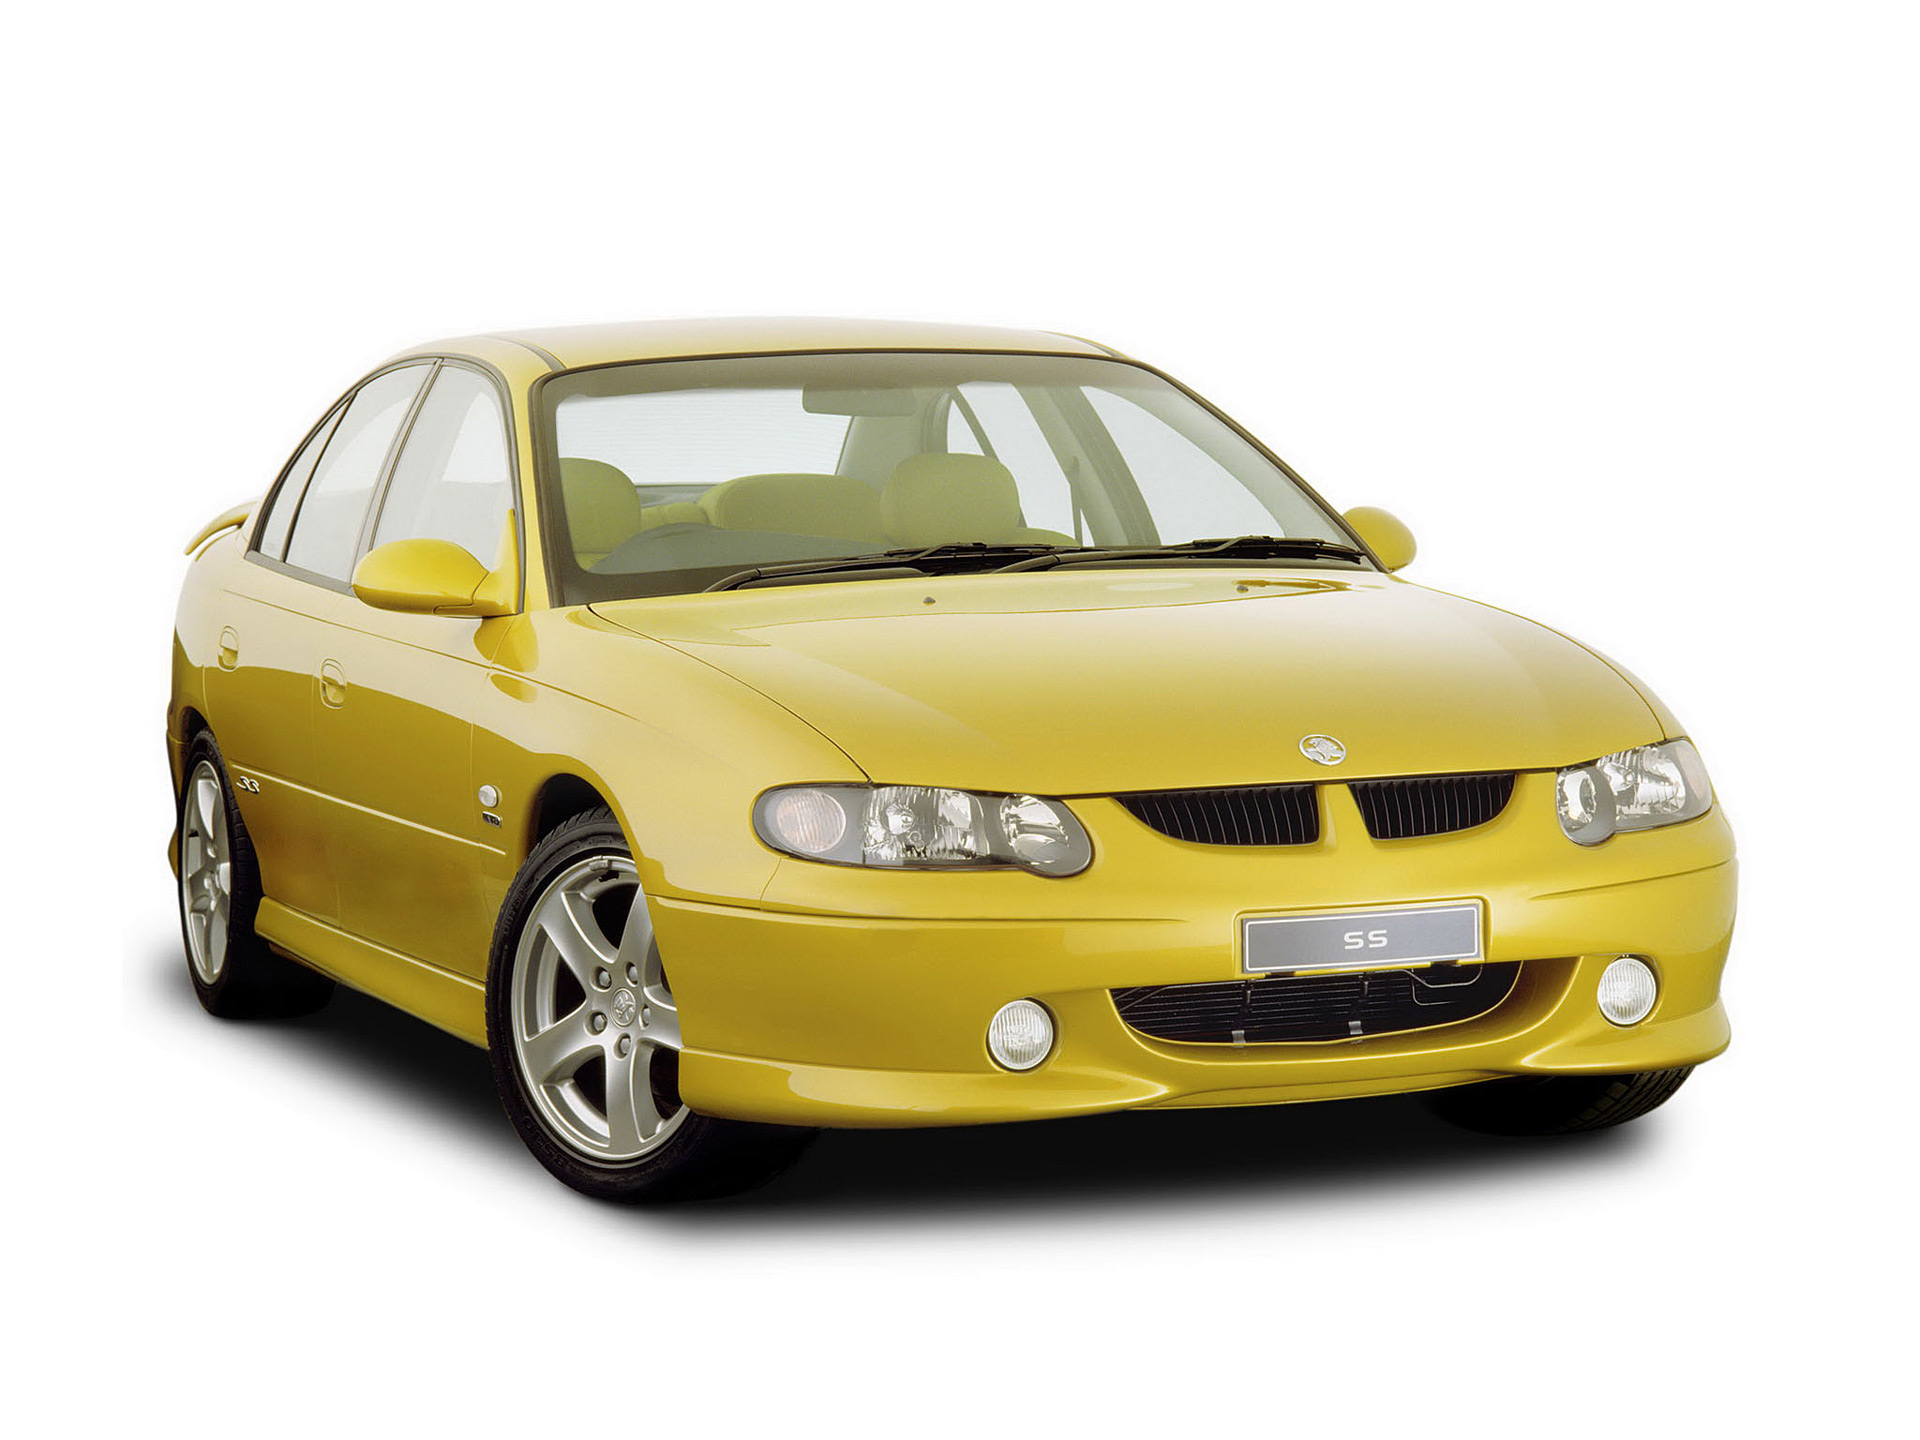  2000 Holden Commodore SS Wallpaper.